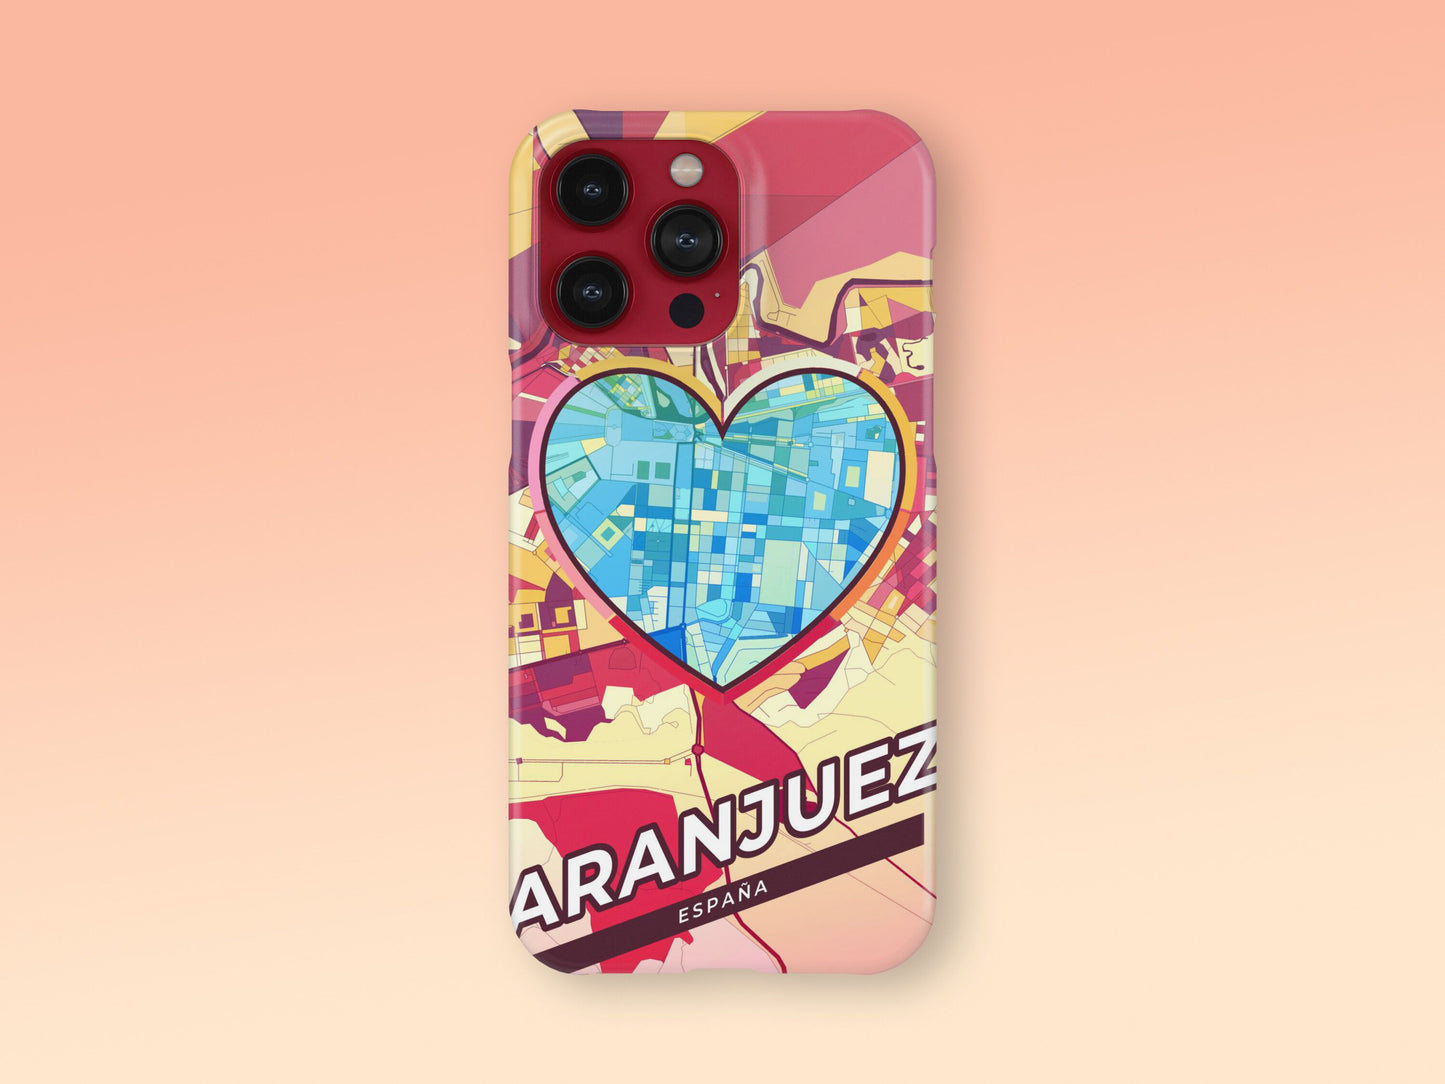 Aranjuez Spain slim phone case with colorful icon. Birthday, wedding or housewarming gift. Couple match cases. 2